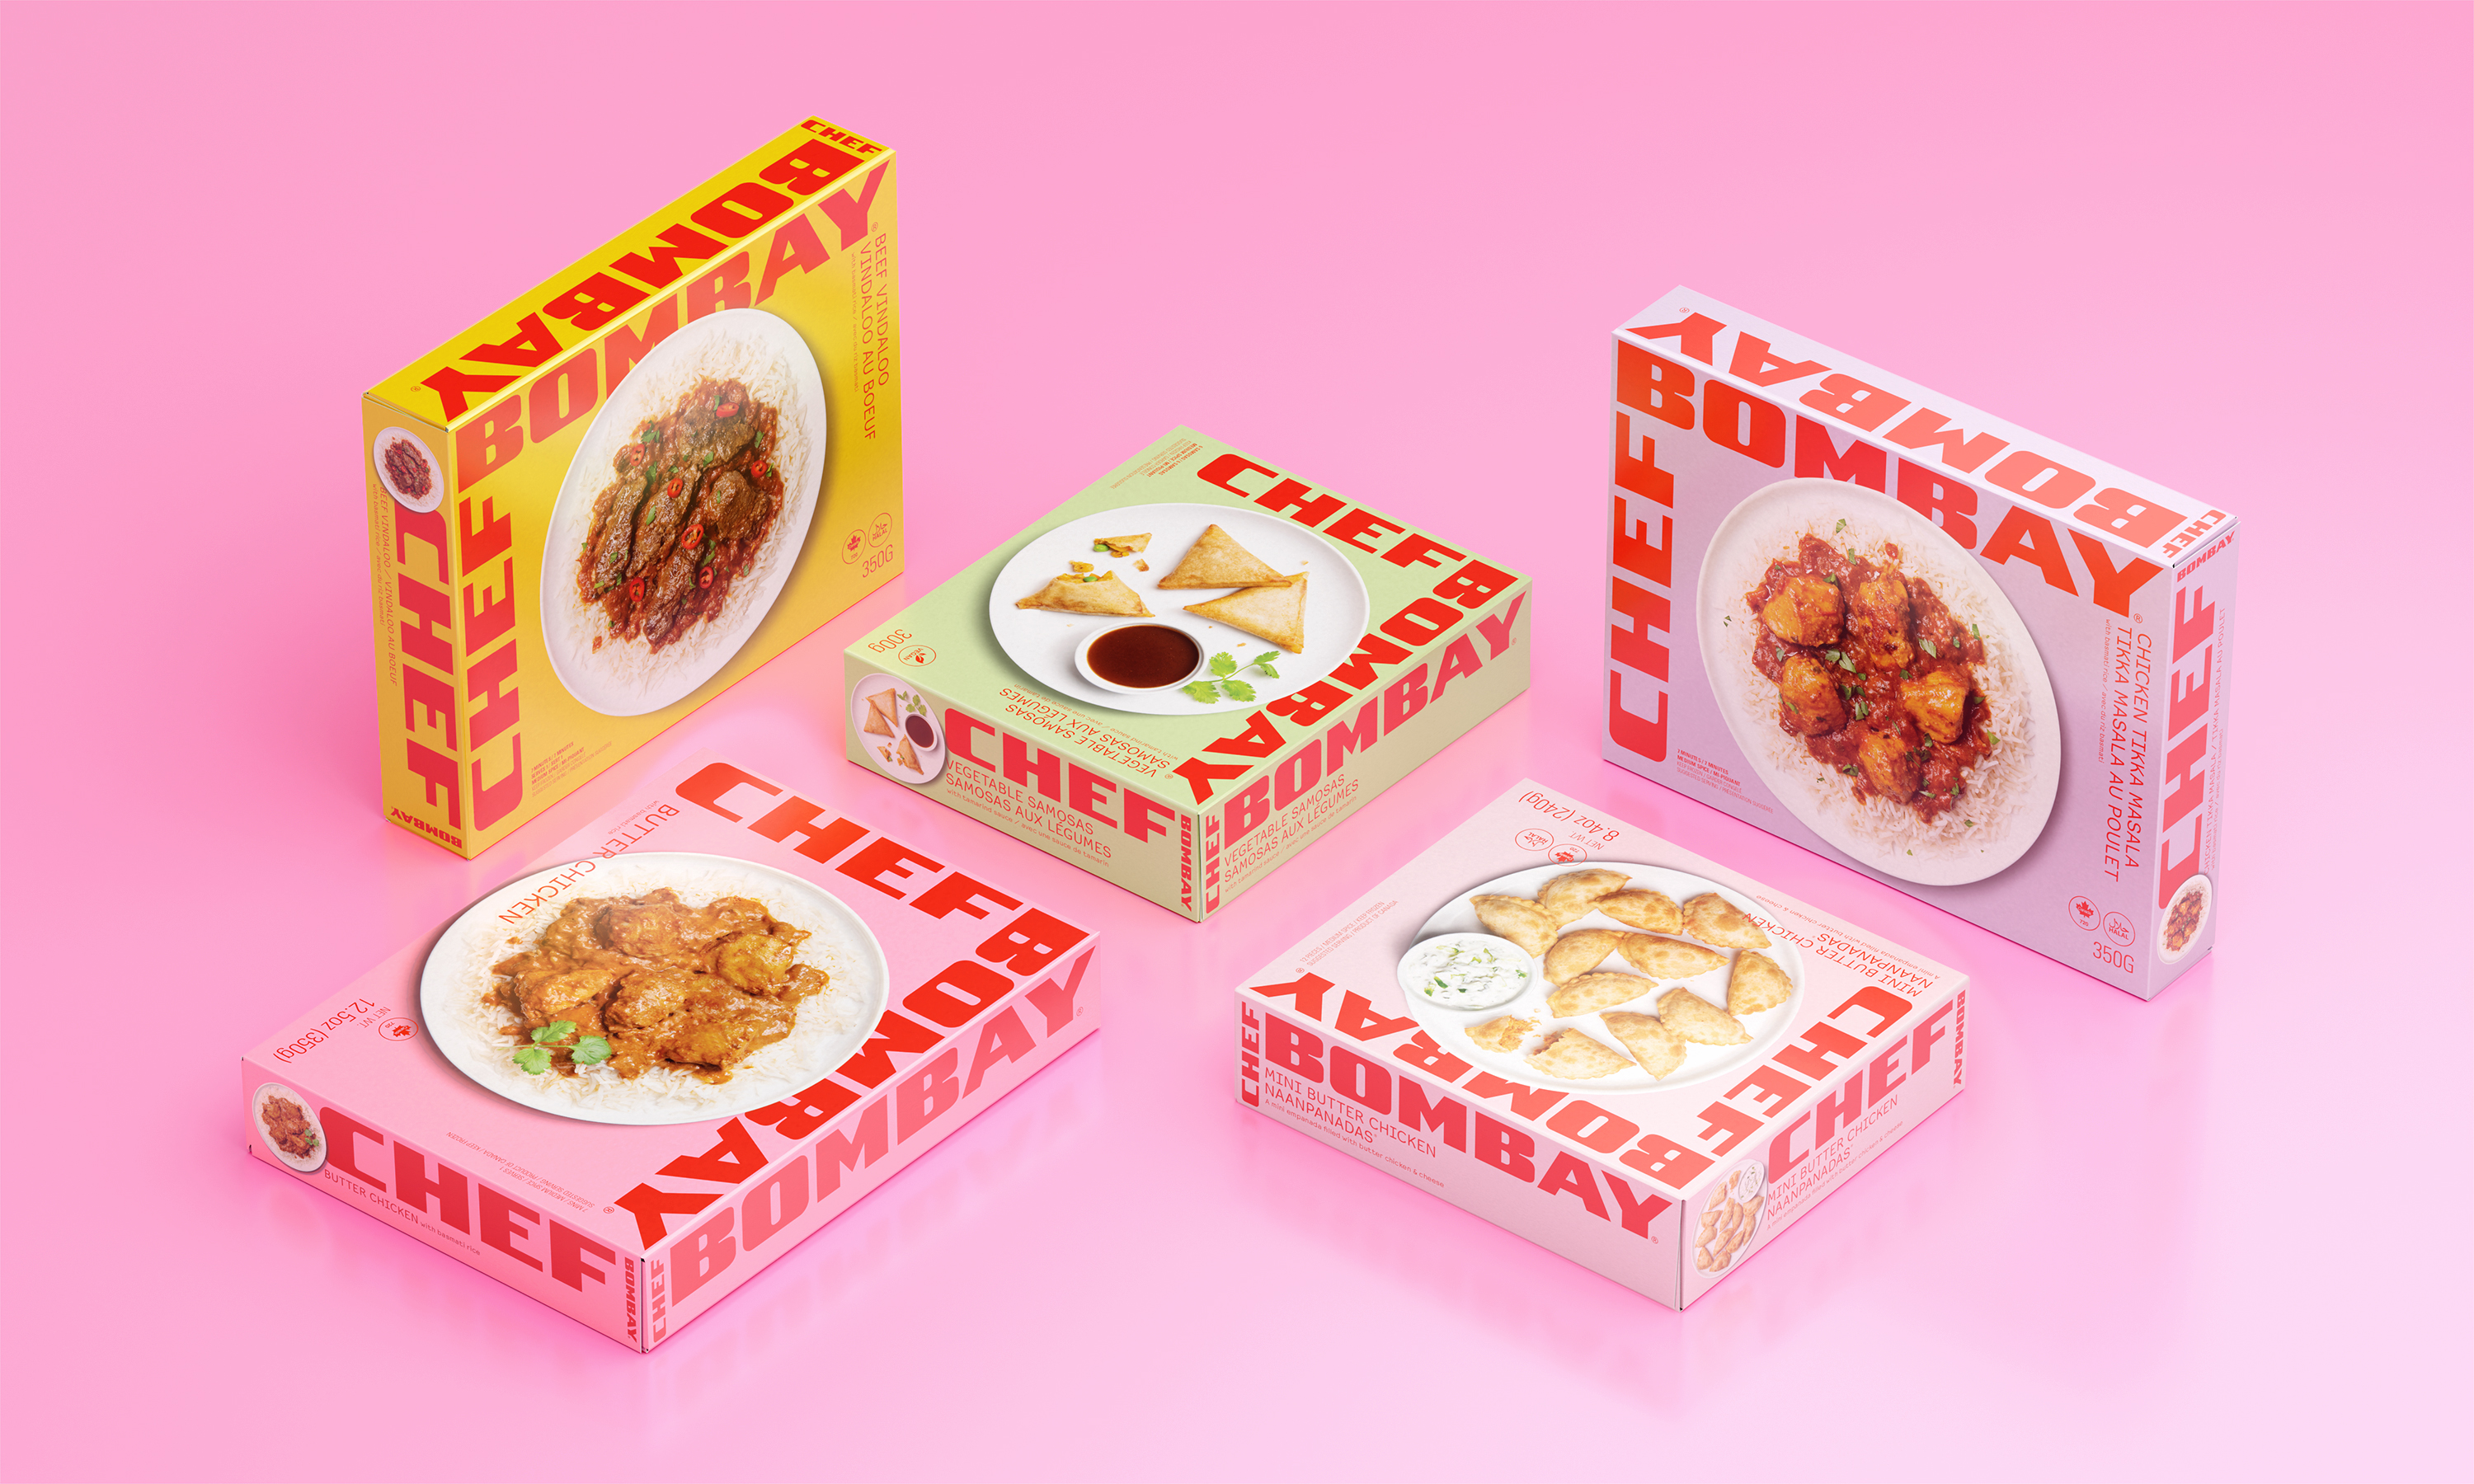 Selection of Chef Bombay boxes on a pink background